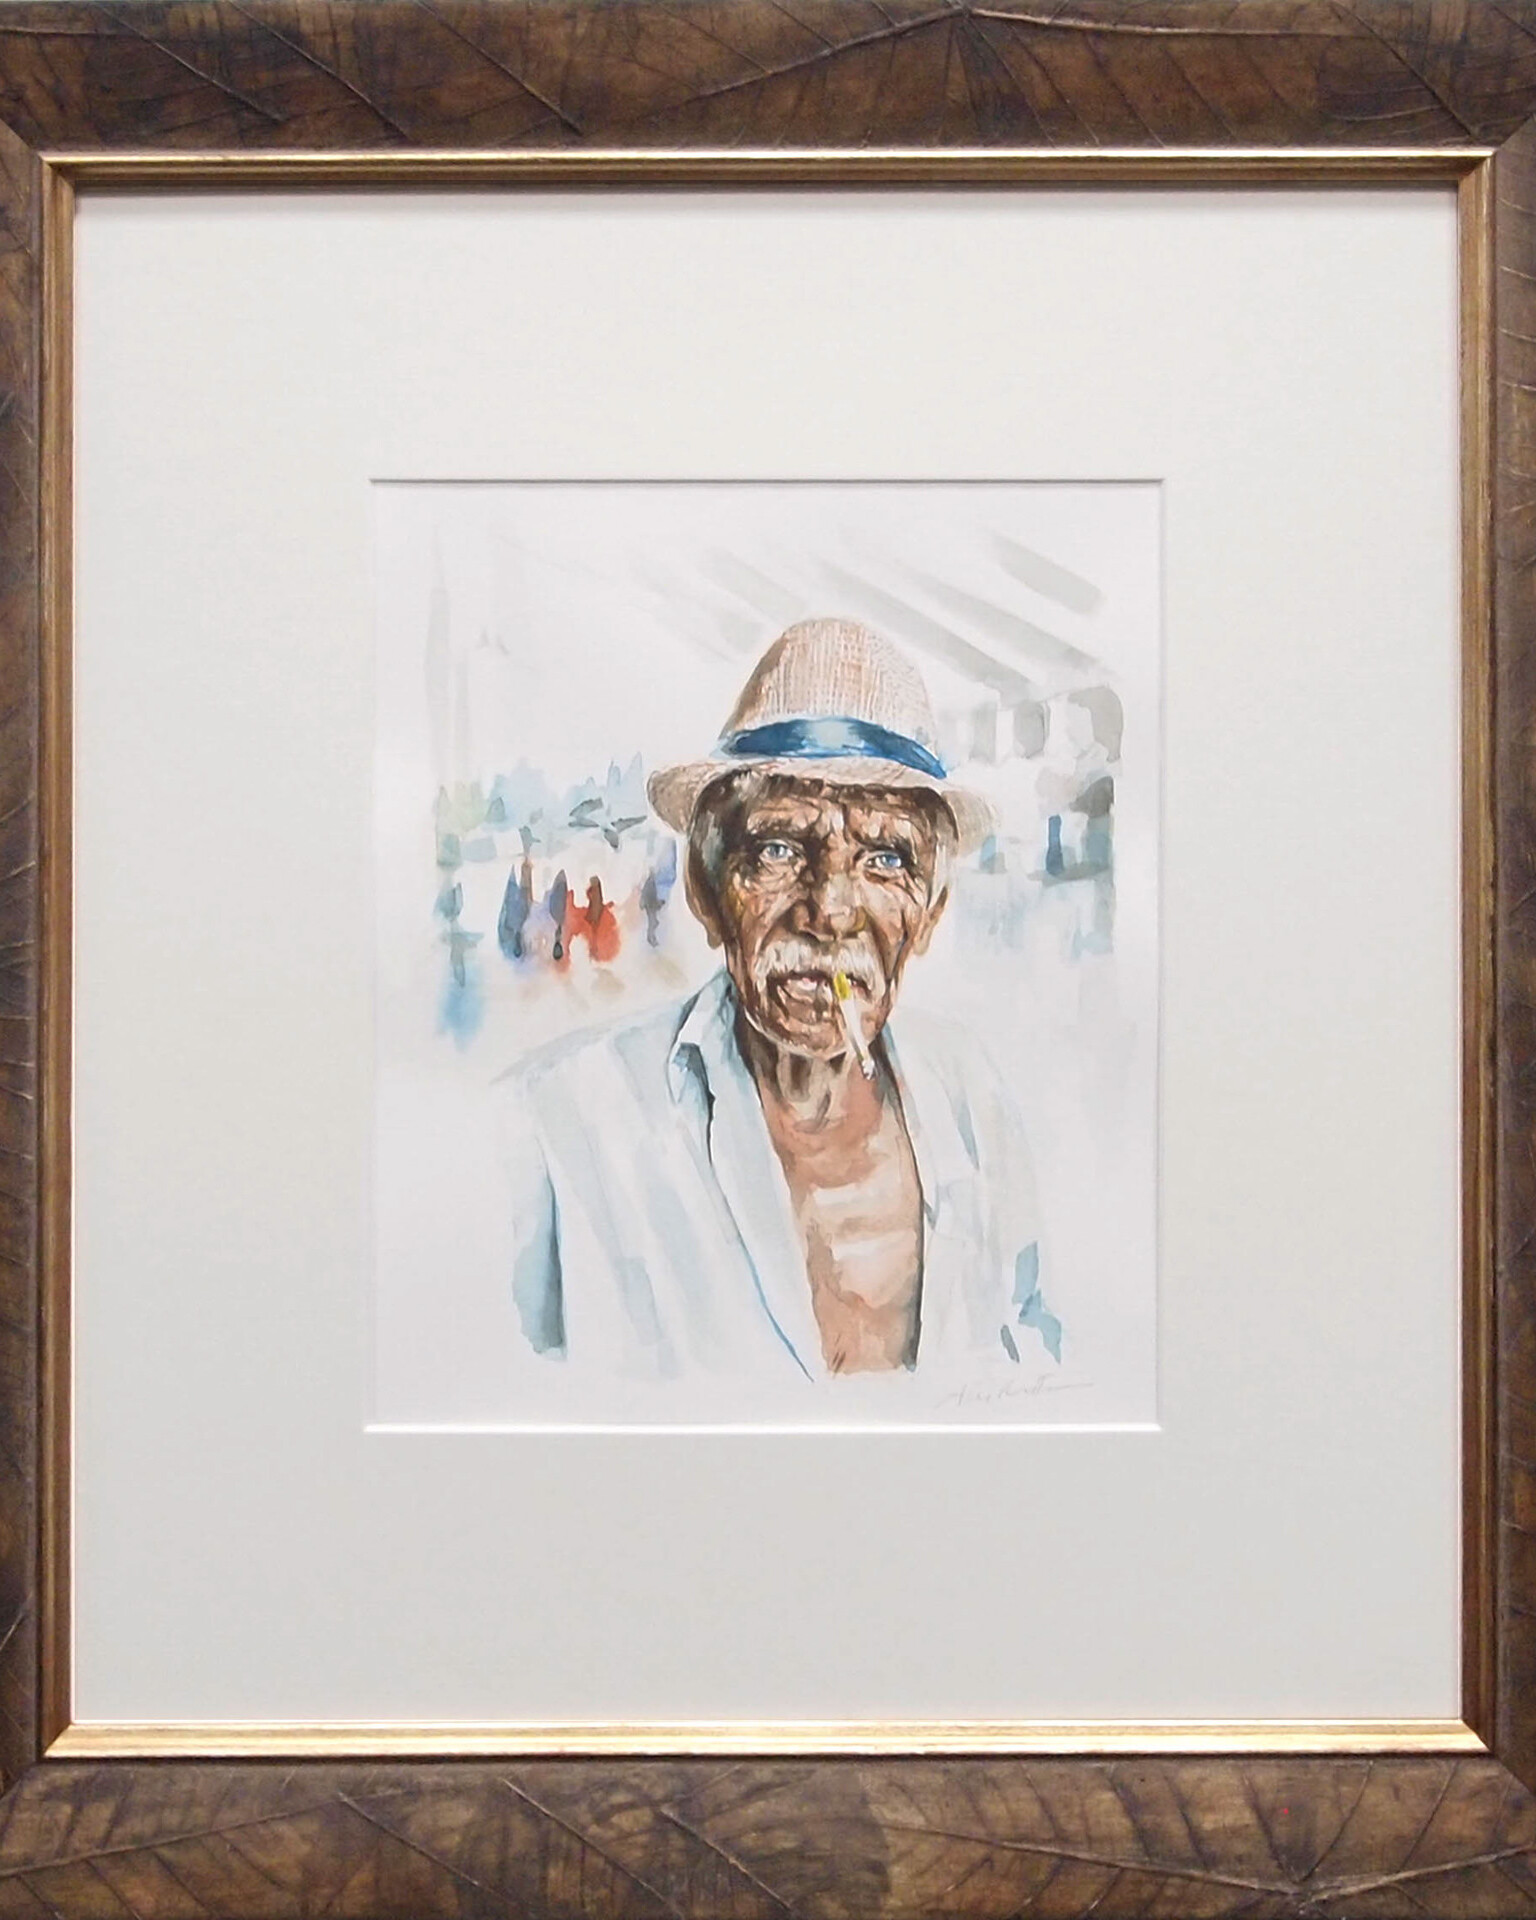 Watercolor portrait of 'Old Man Domenico' by Alex Righetto, depicting an elderly man with deep blue eyes and a storied face, framed in an exclusive brown wood frame, symbolizing a personal narrative intertwined with global history.